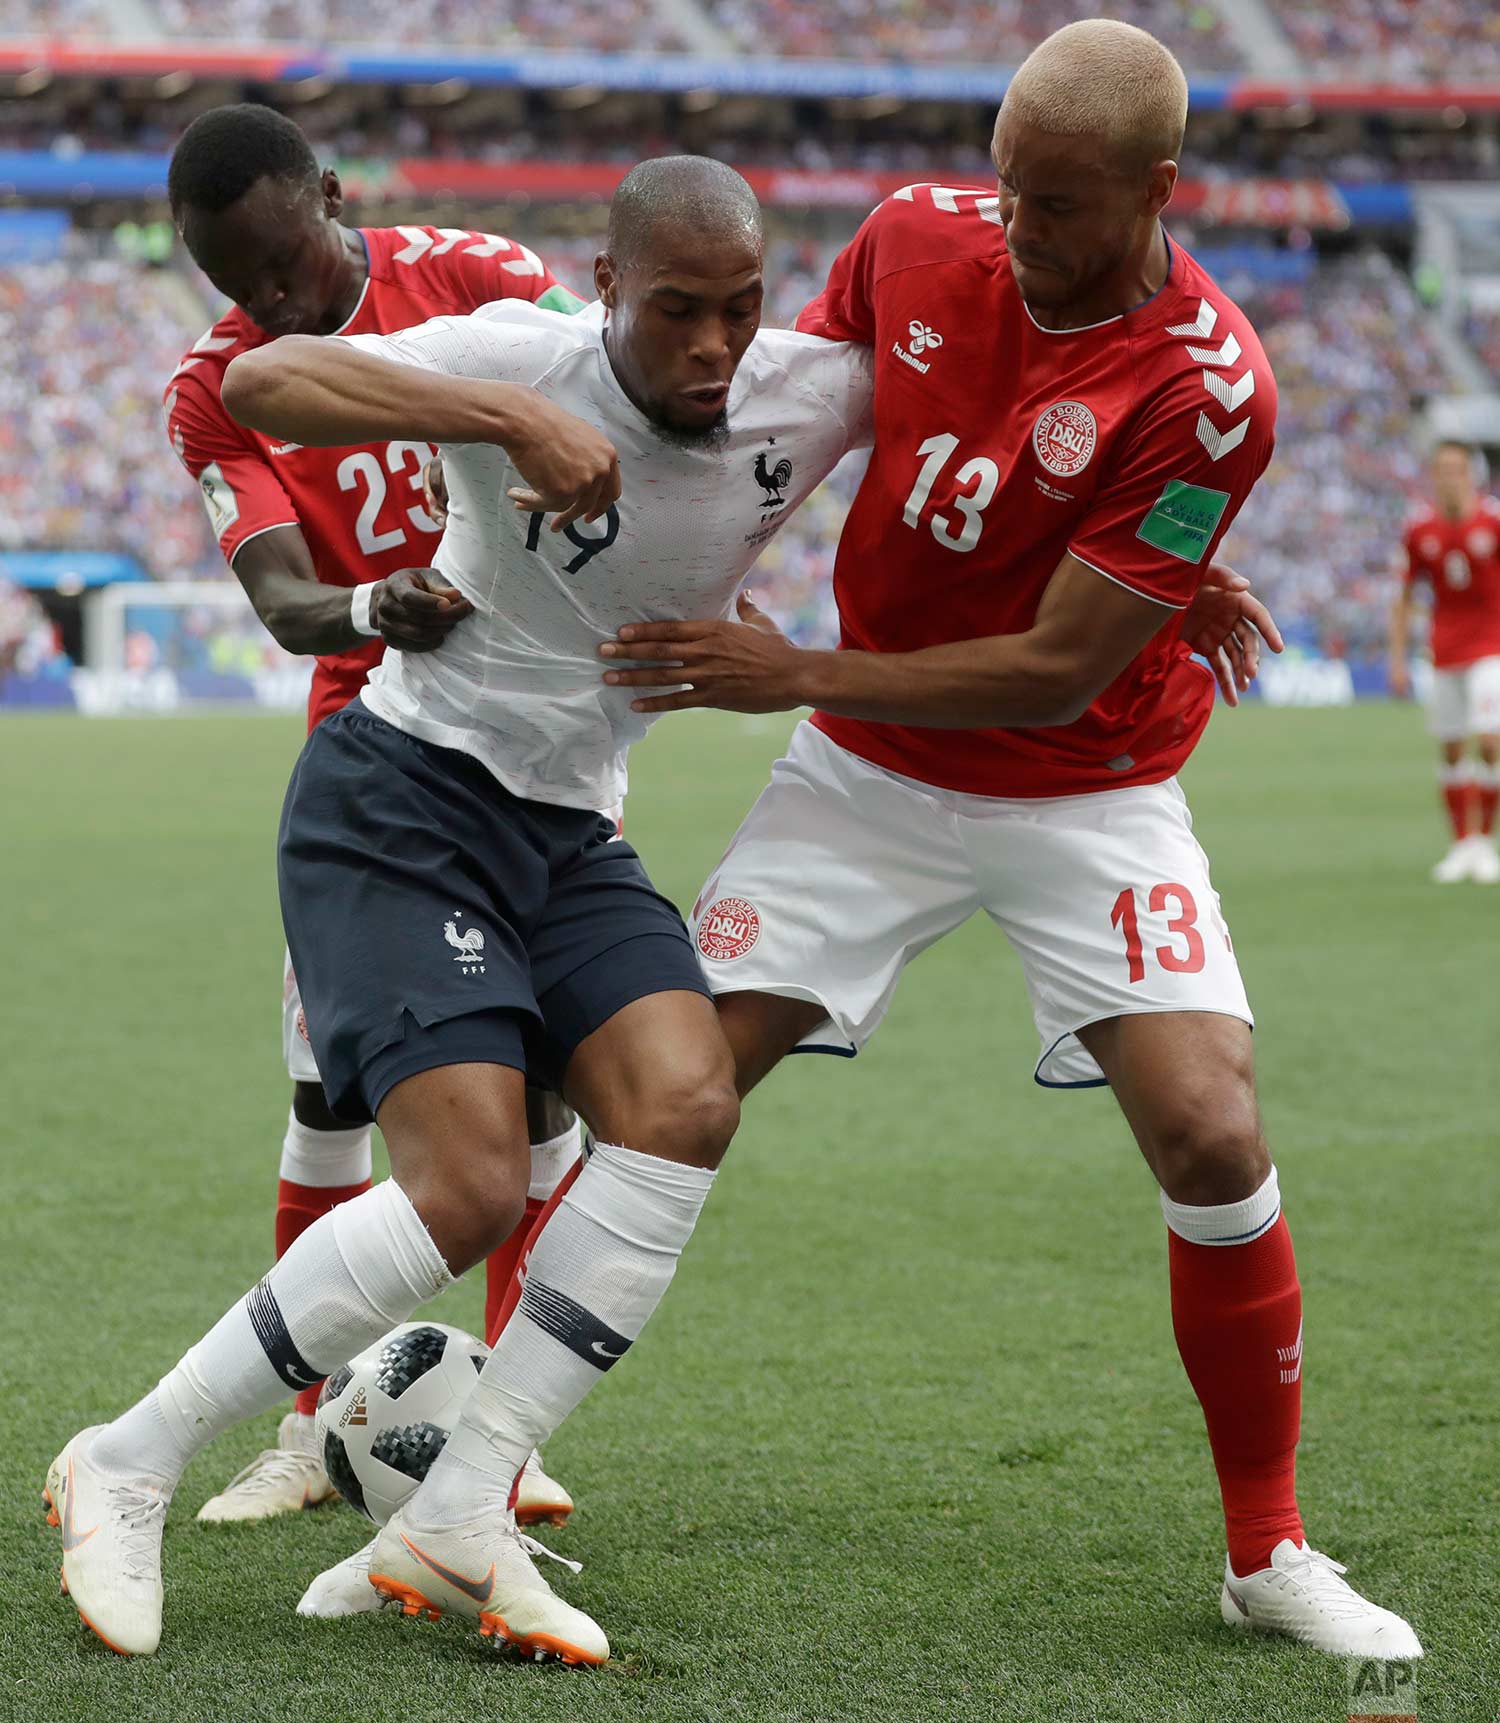  France's Djibril Sidibe, centre is tackled by Denmark's Pione Sisto, left, and Denmark's Mathias Jorgensen during the group C match between Denmark and France at the 2018 soccer World Cup at the Luzhniki Stadium in Moscow, Russia, Tuesday, June 26, 